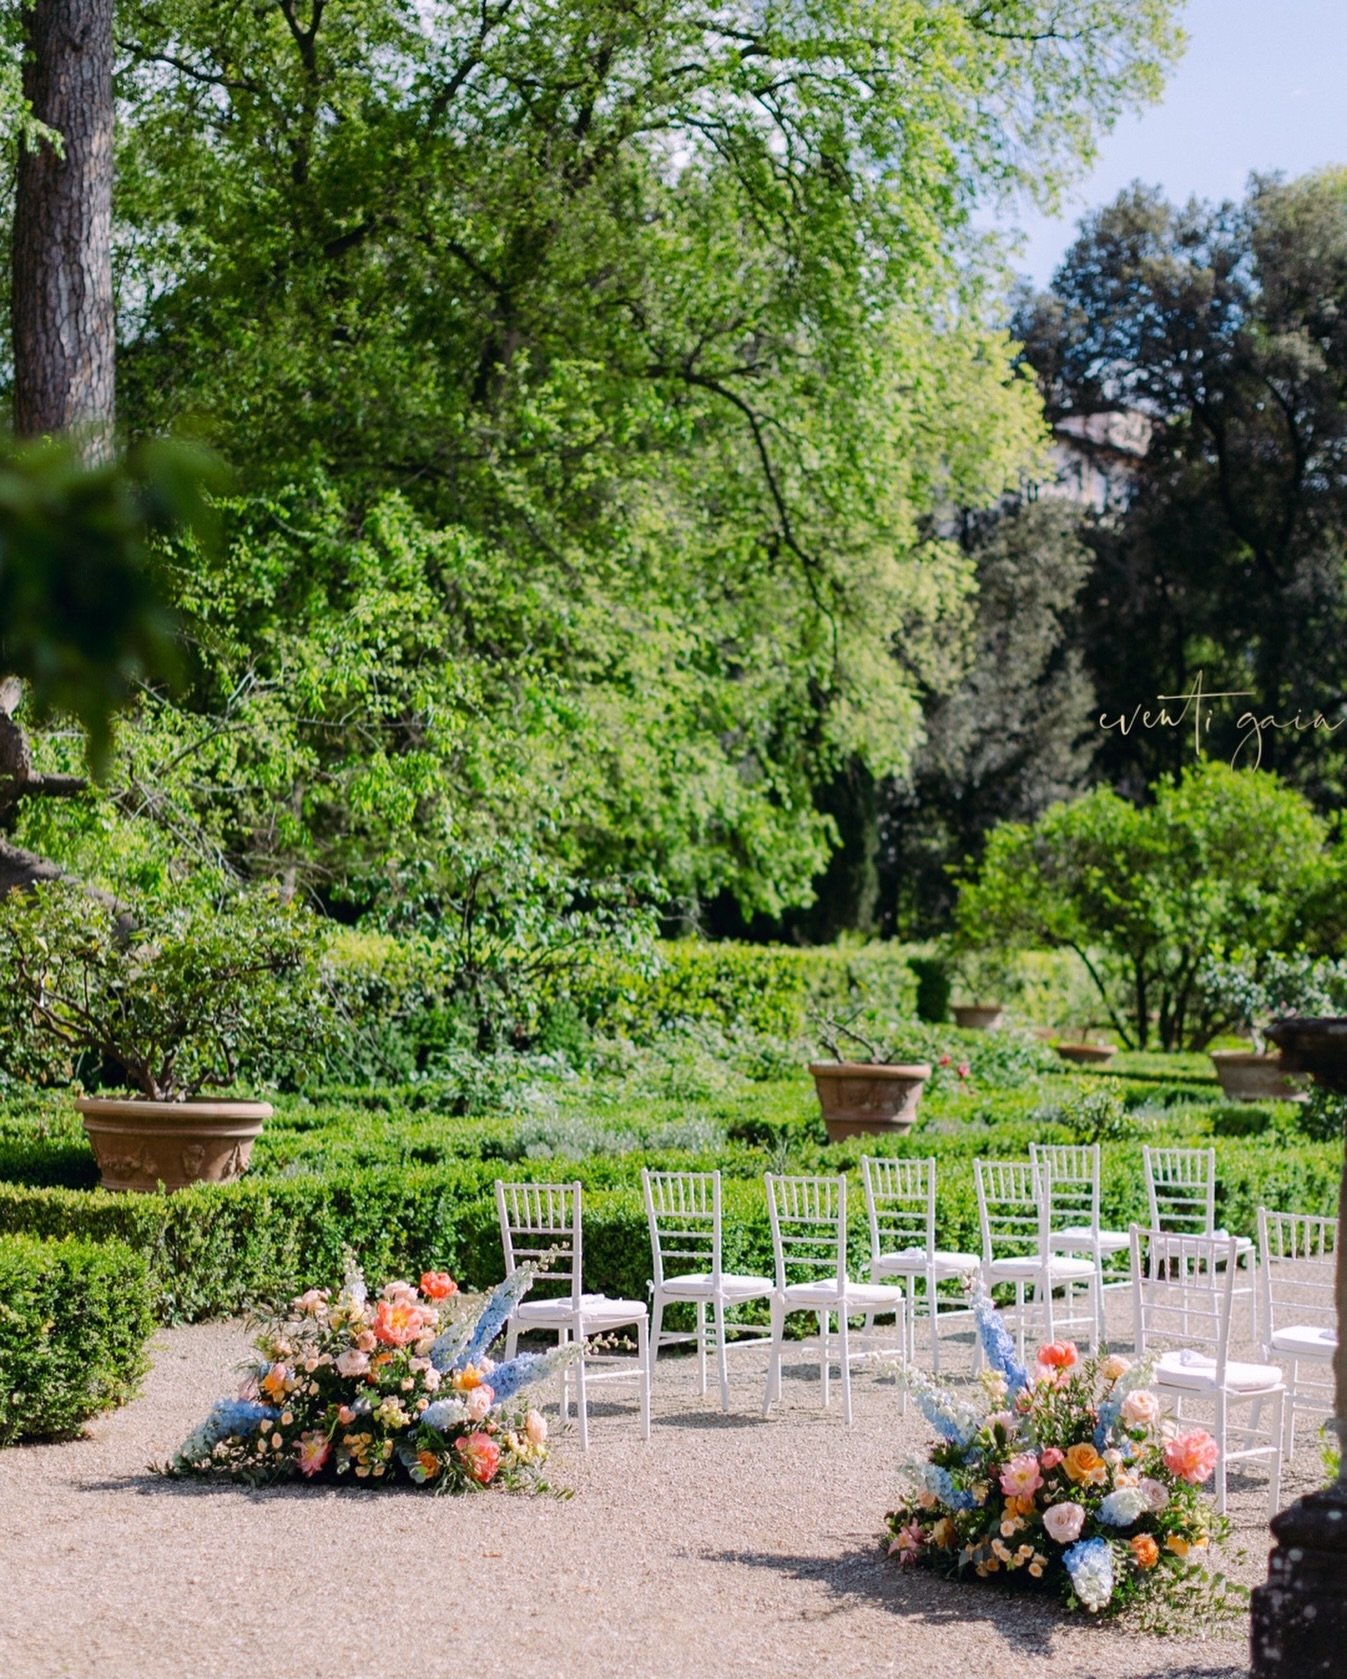 Underneath the Tuscan sun, amidst the fragrant blooms and ancient statues, Nicolas &amp; Katlyn pledged their love in the timeless embrace of an Italian garden in Florence. 🌷 🌿✨ 

#EternalRomance #FlorenceFairytale #eventigaia #destinationwedding #